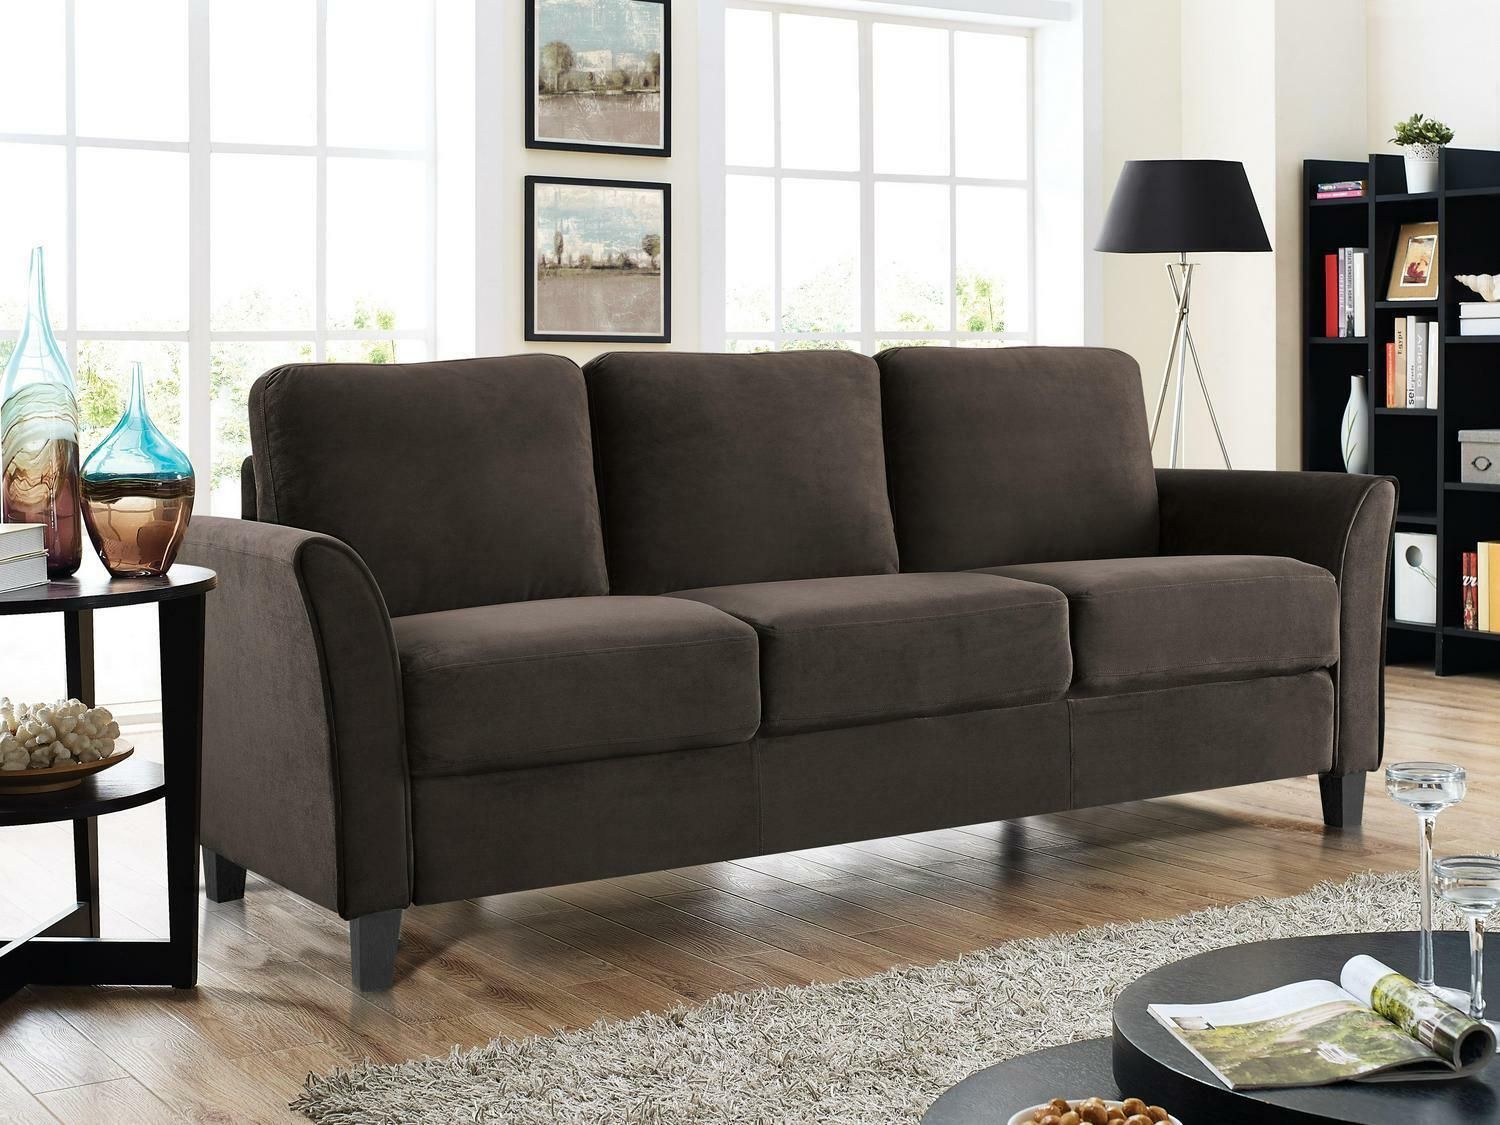 New Modern Alexa 3 Seat Curved Arm Microfiber Sofa Couch Living Room  Furniture | Ebay Intended For Sofas With Curved Arms (View 10 of 15)